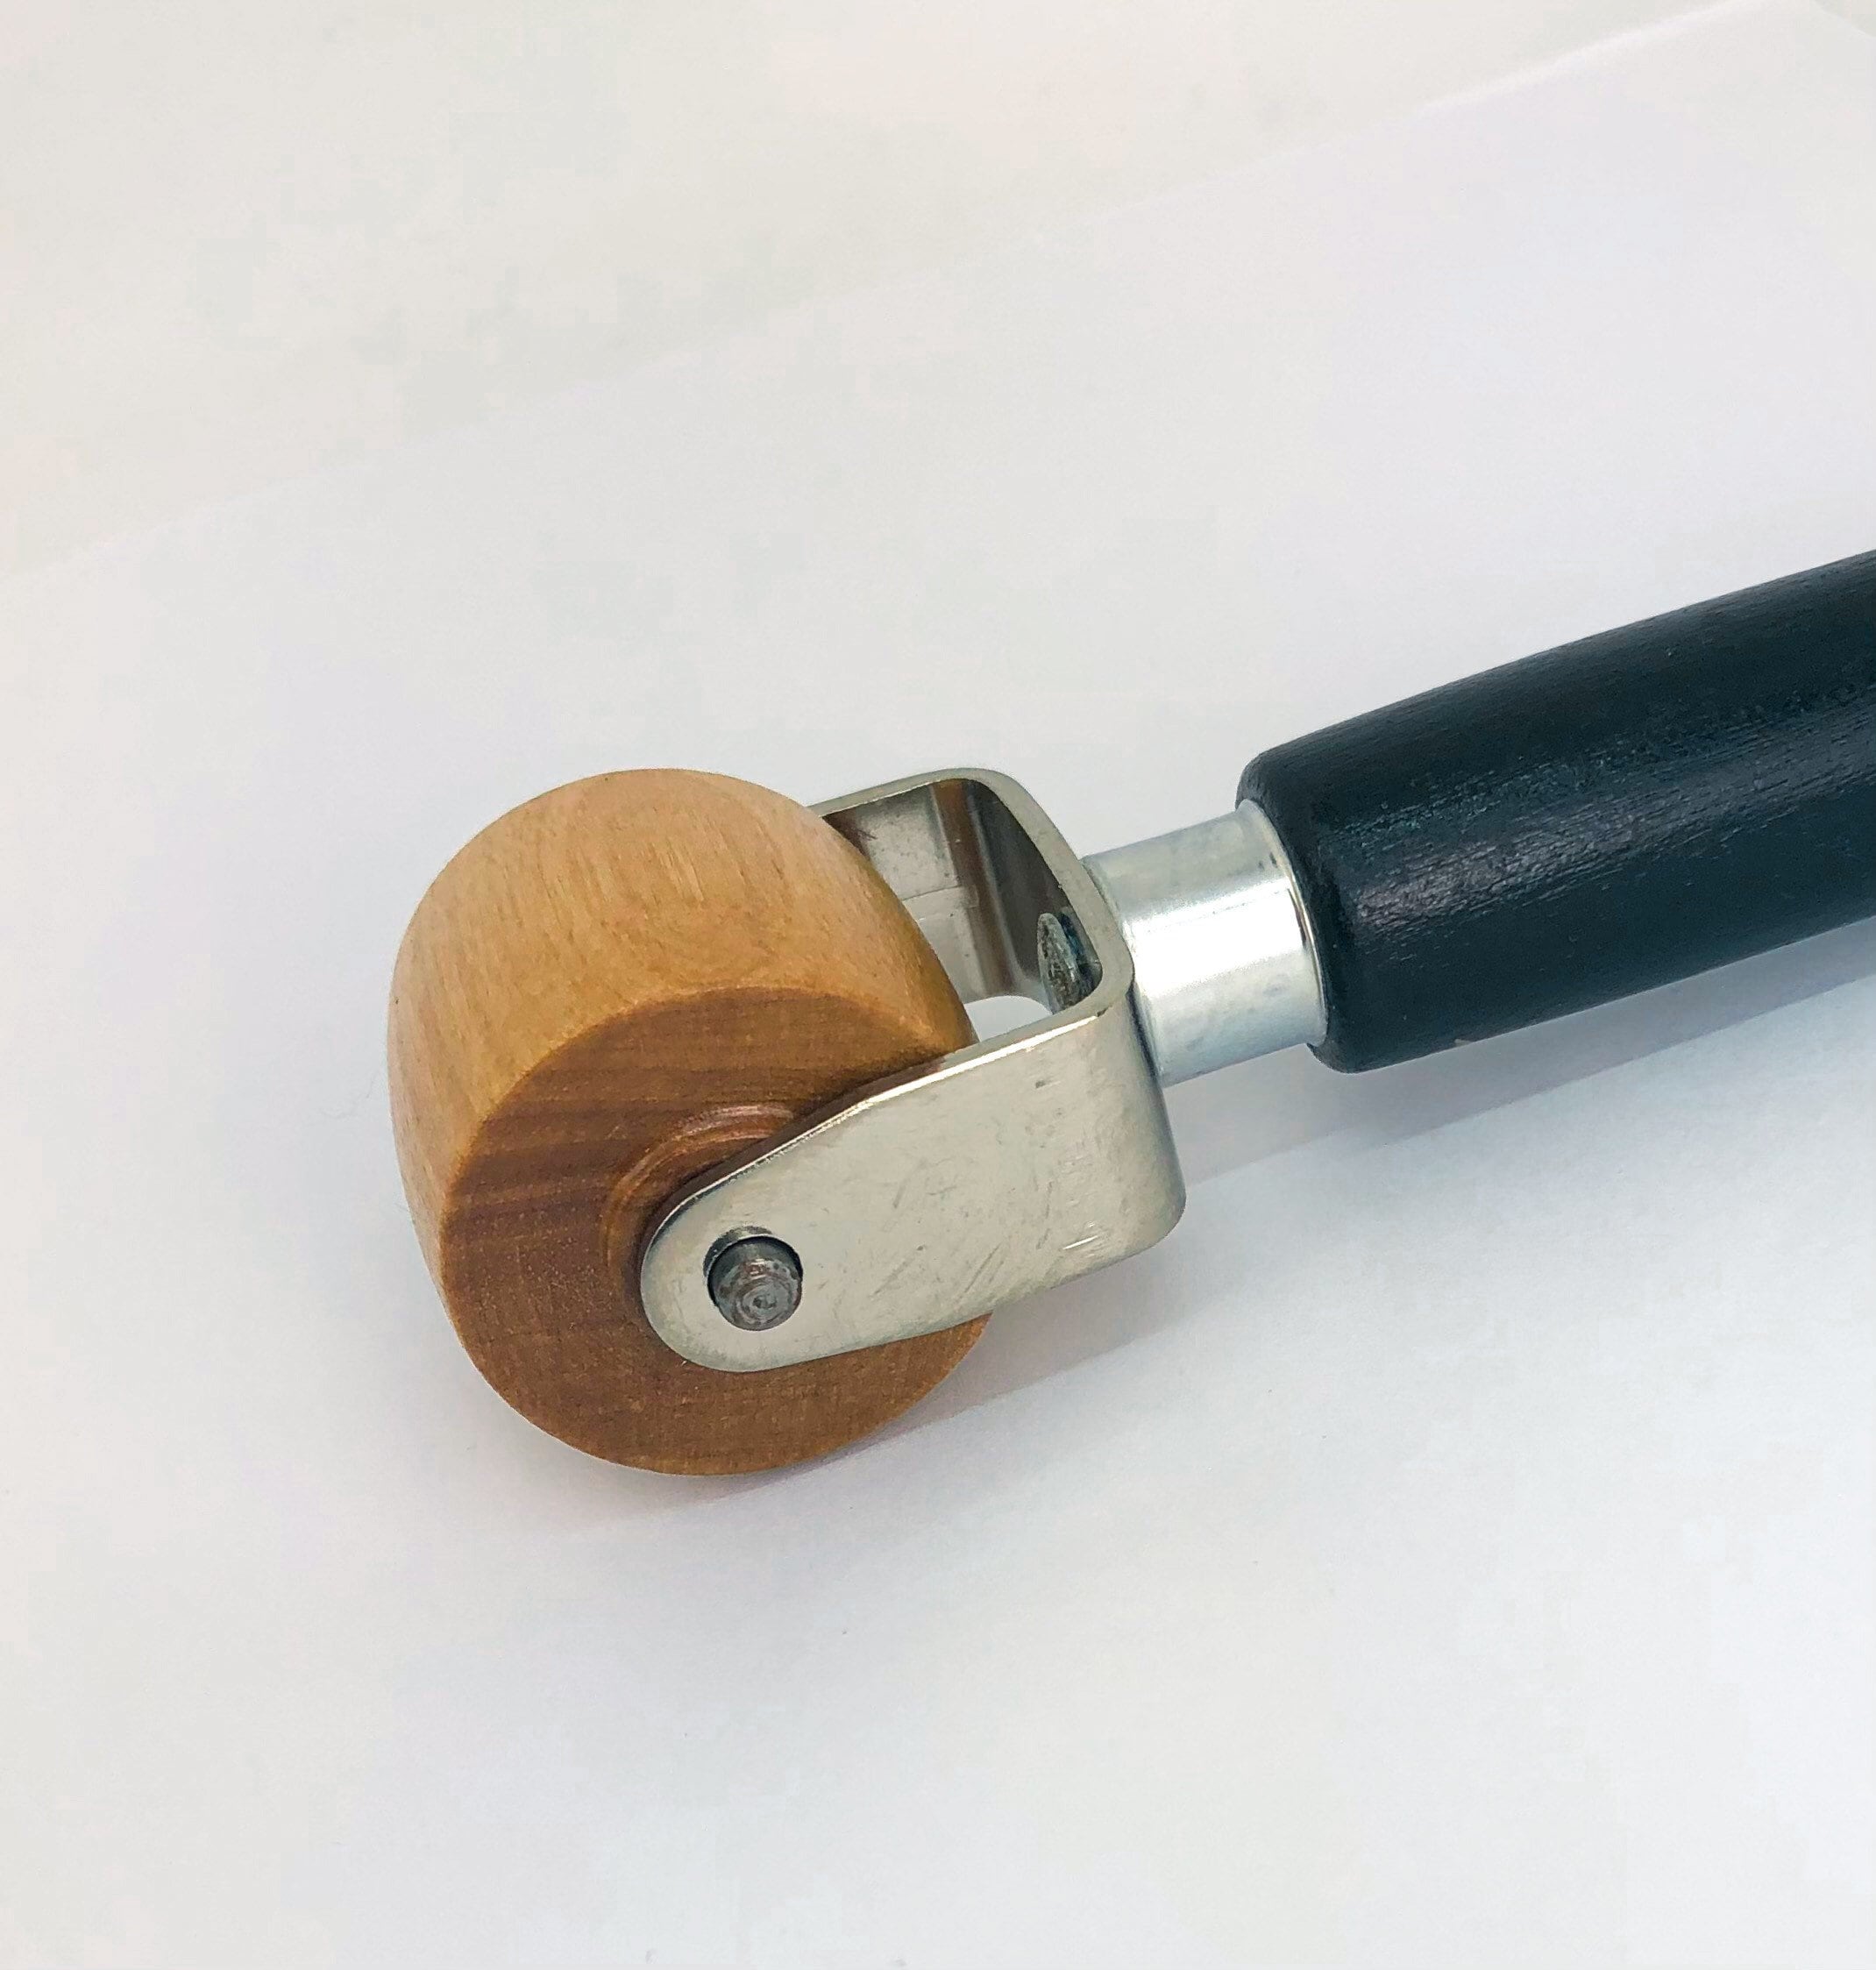 Seam Roller for Sewing, Wooden Seam Roller, Seam Pressing Tool for Sewing,  Quilting and Bag Making 